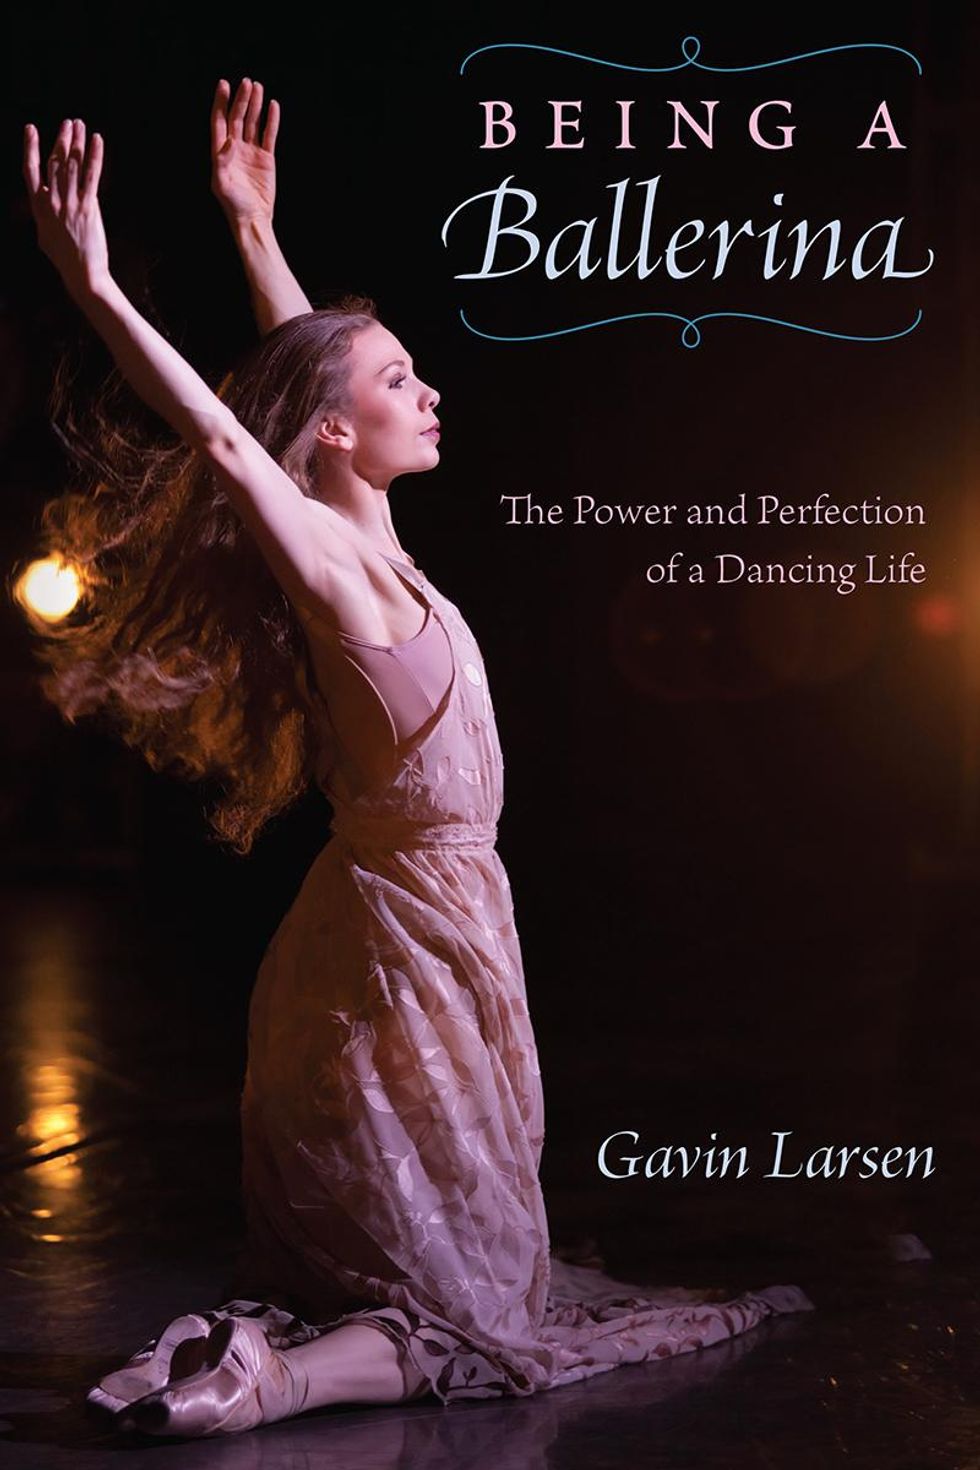 Gavin Larsen is shown onstage, kneeling in a pink dress and pointe shoes. Her long hair flows behind her as she raises her arms and looks out to the audience. The cover reads, "Being a Ballerina: The Power and Perfection of a Dancing Life. Gavin Larsen."